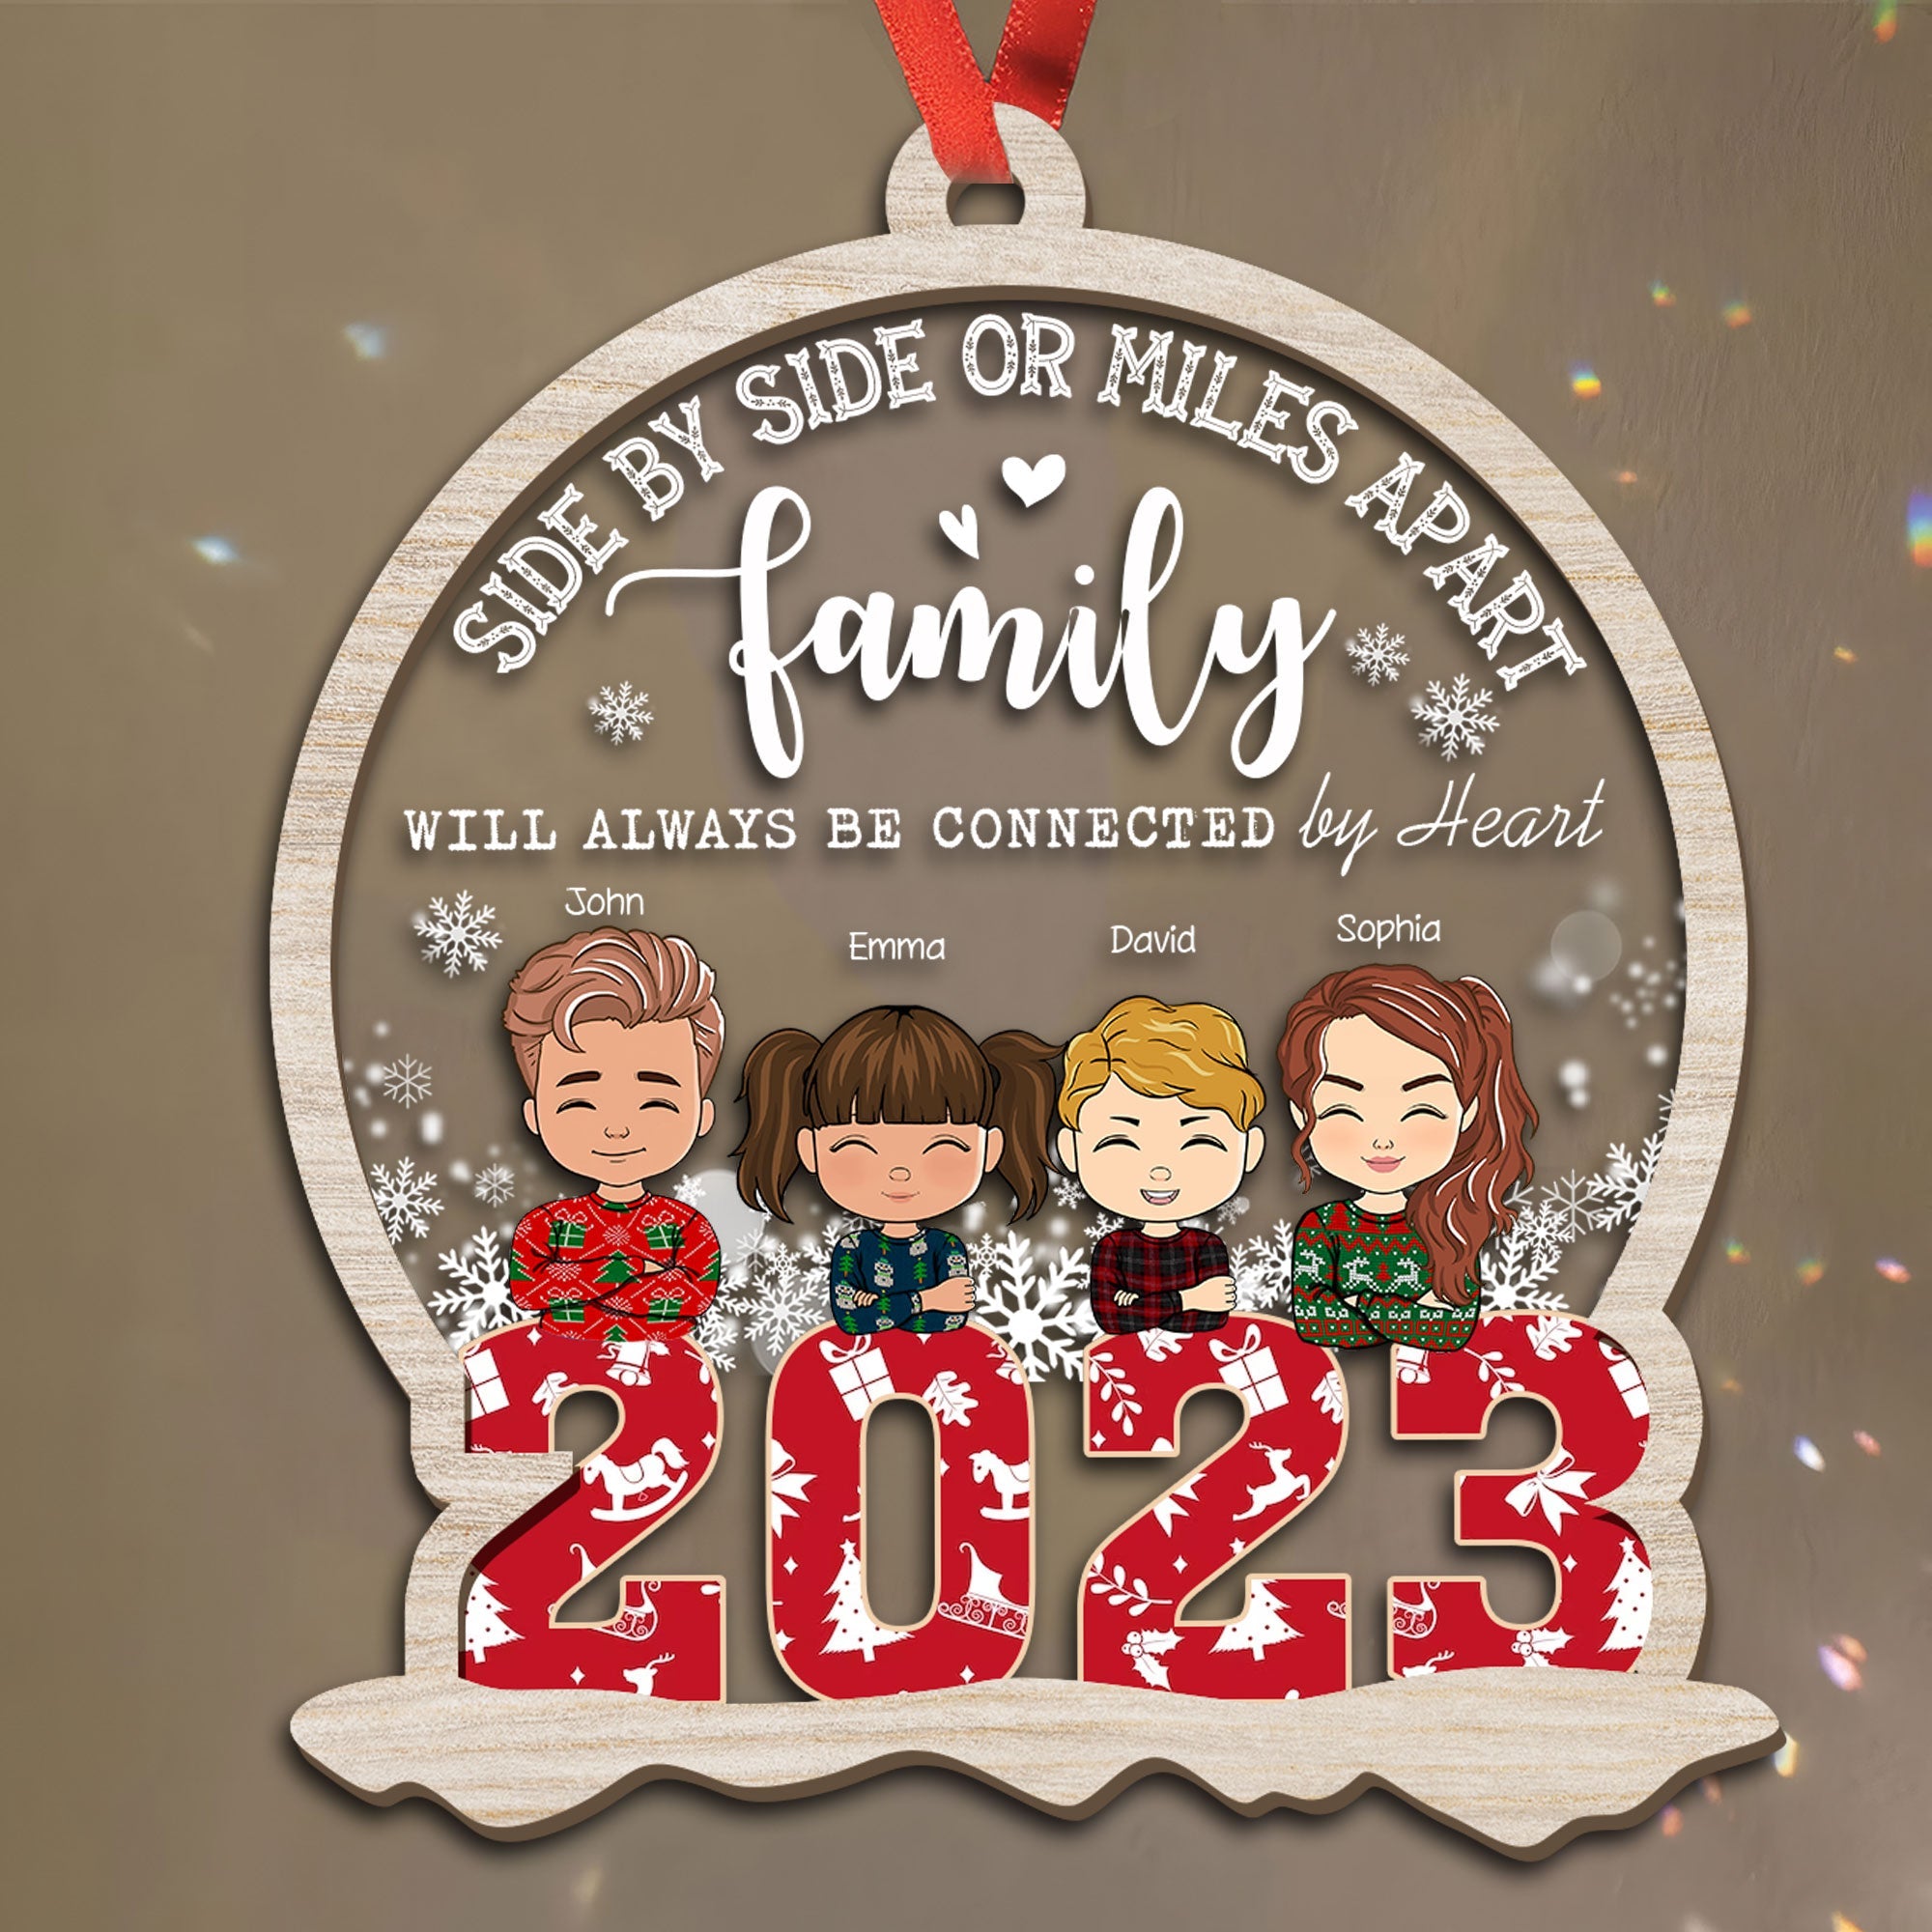 Side By Side Or Miles Apart Family Will Always Be Connected By Heart Ornament - Custom Shape Wood and Acrylic Ornament